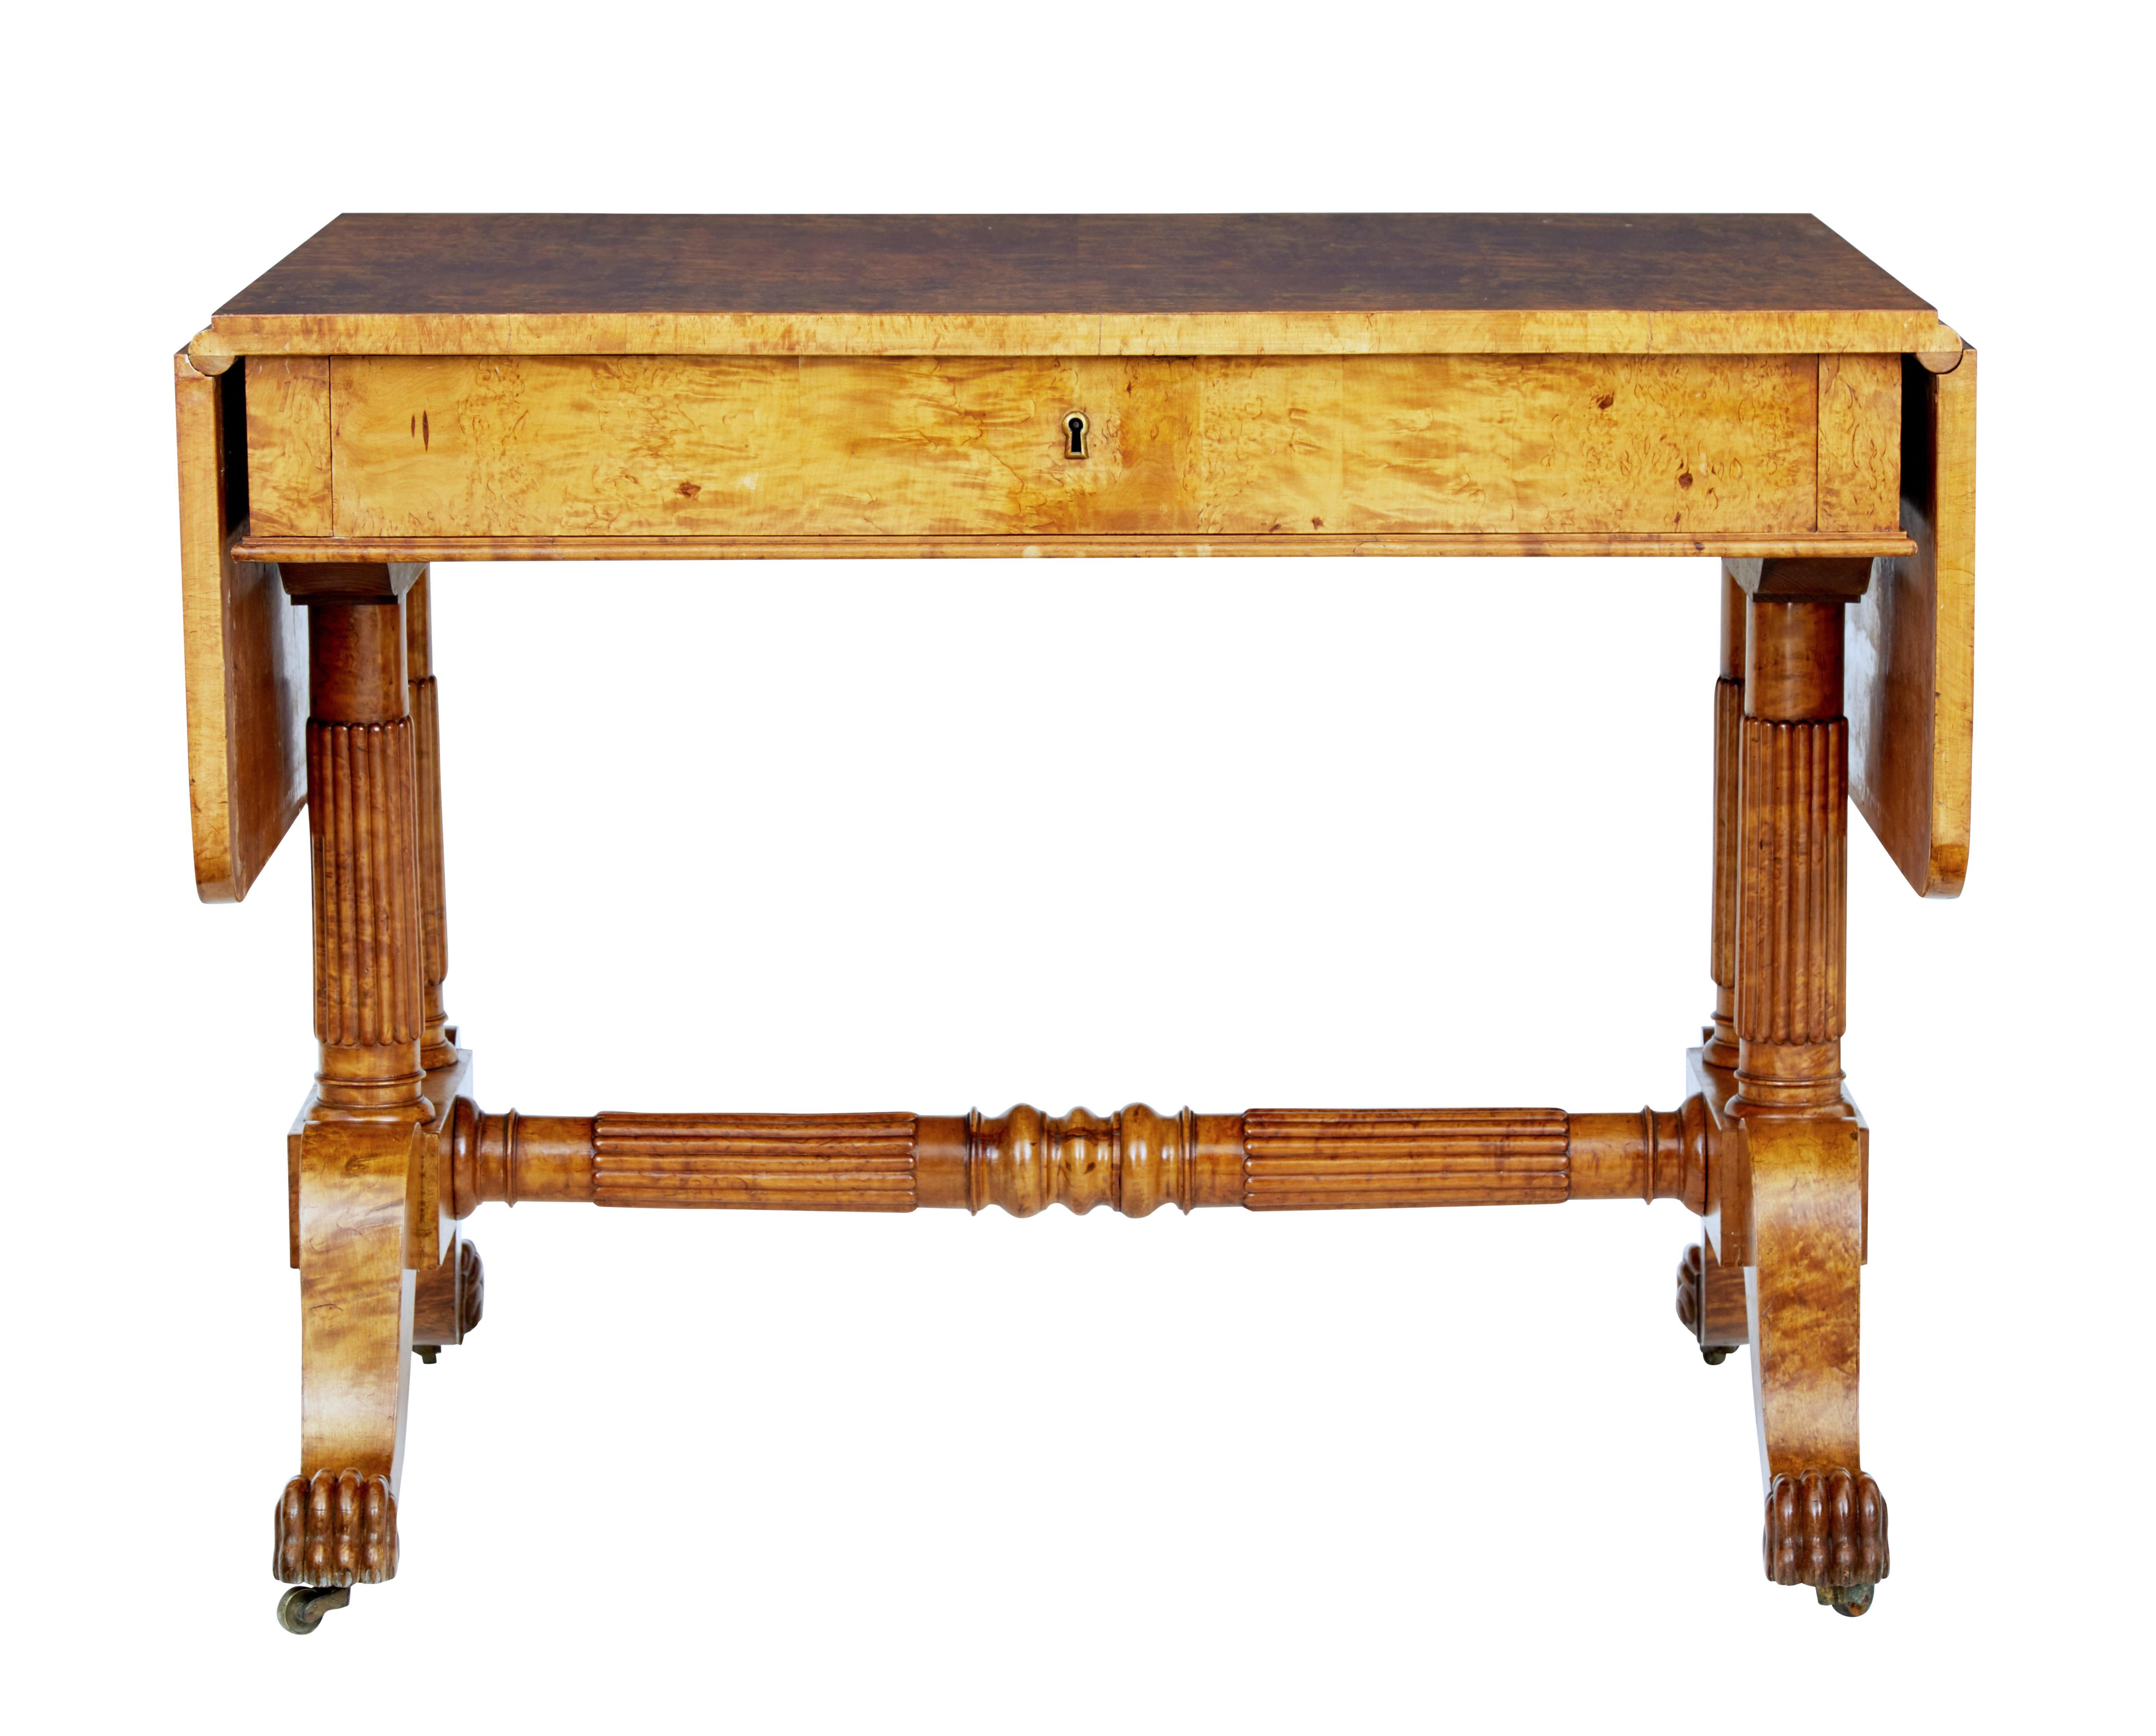 Superb quality Biedermeier period sofa table, circa 1825.

Beautifully made from burr birch, giving it strong grains and color. Drop down flaps provide a overall length of just over 63 inches.

Single deep drawer below the top surface. Standing